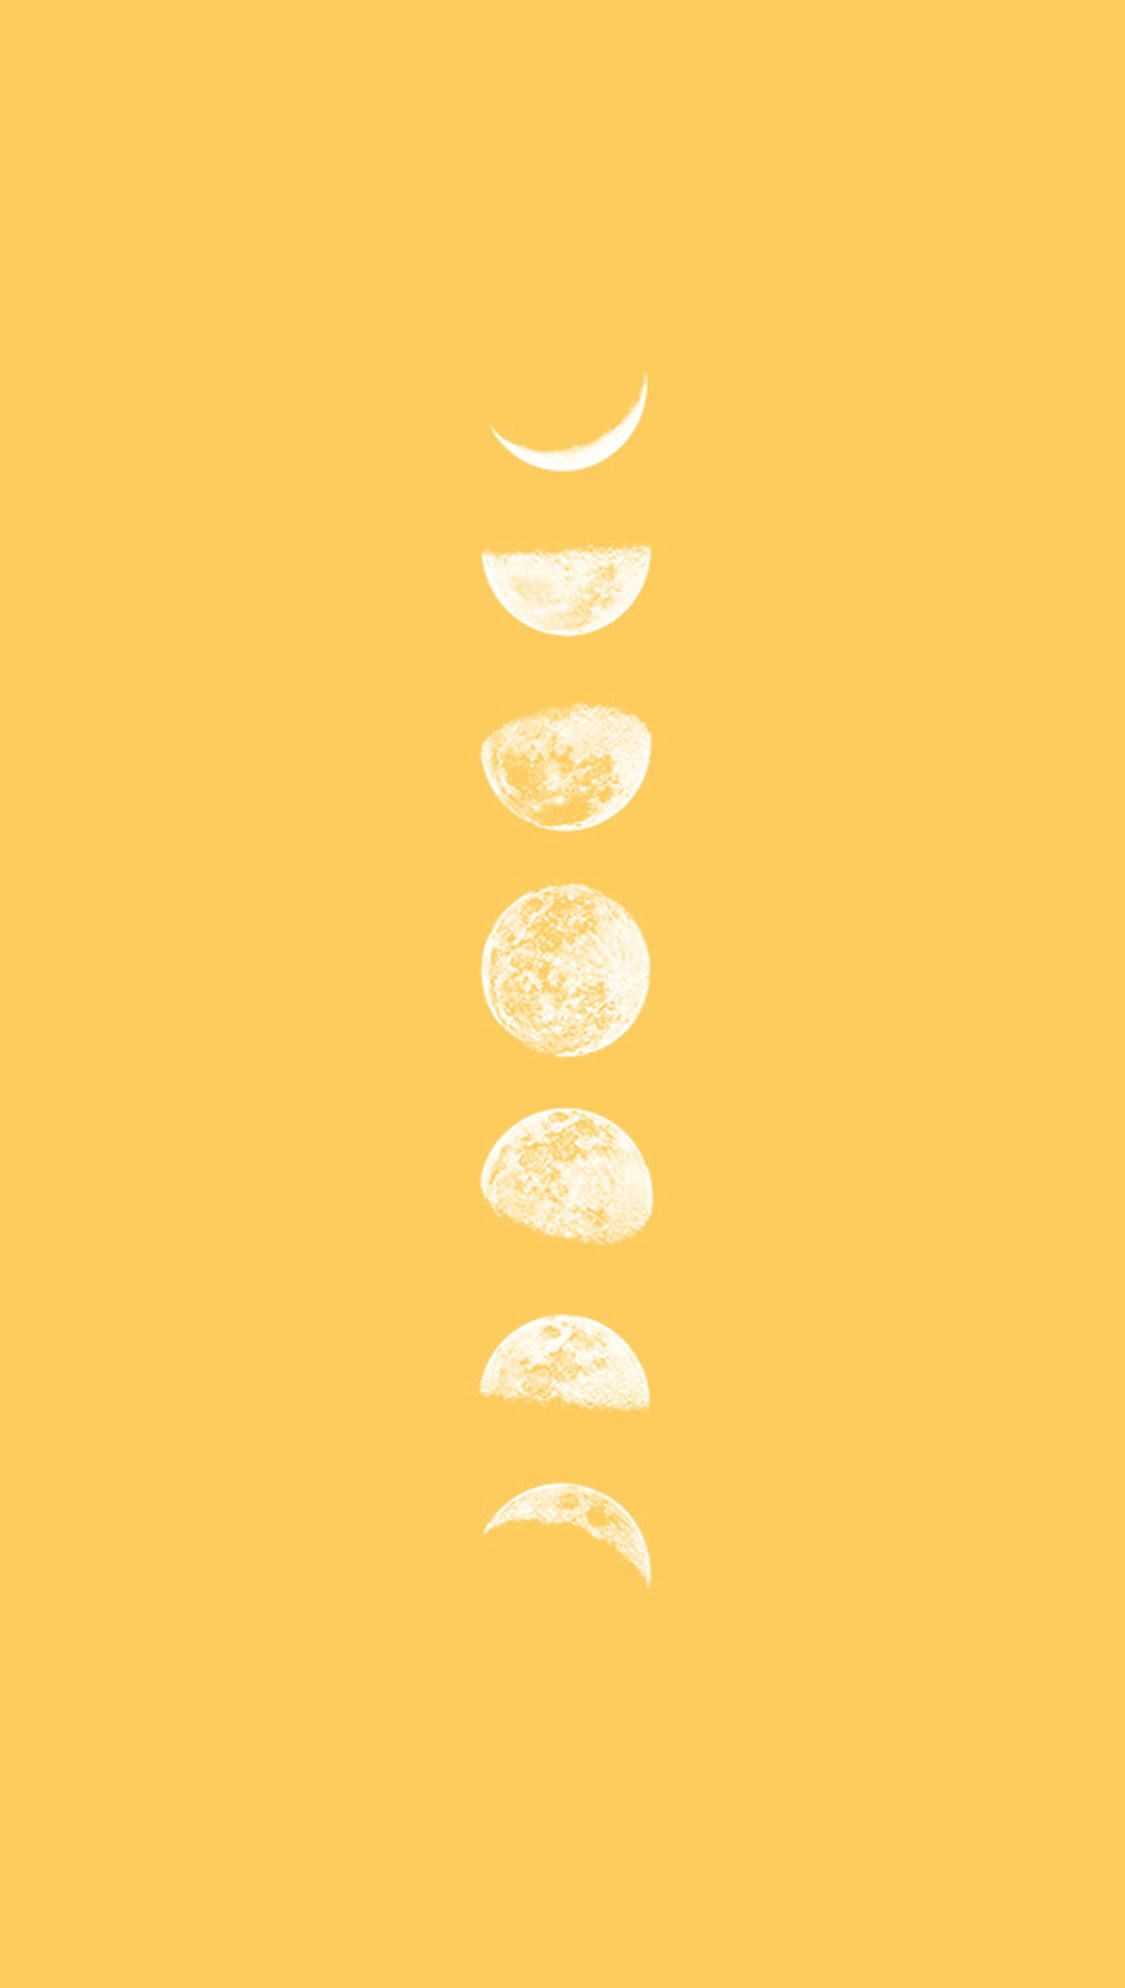 Aesthetic wallpaper of the moon phases on a yellow background - Honey, pastel yellow, light yellow, yellow iphone